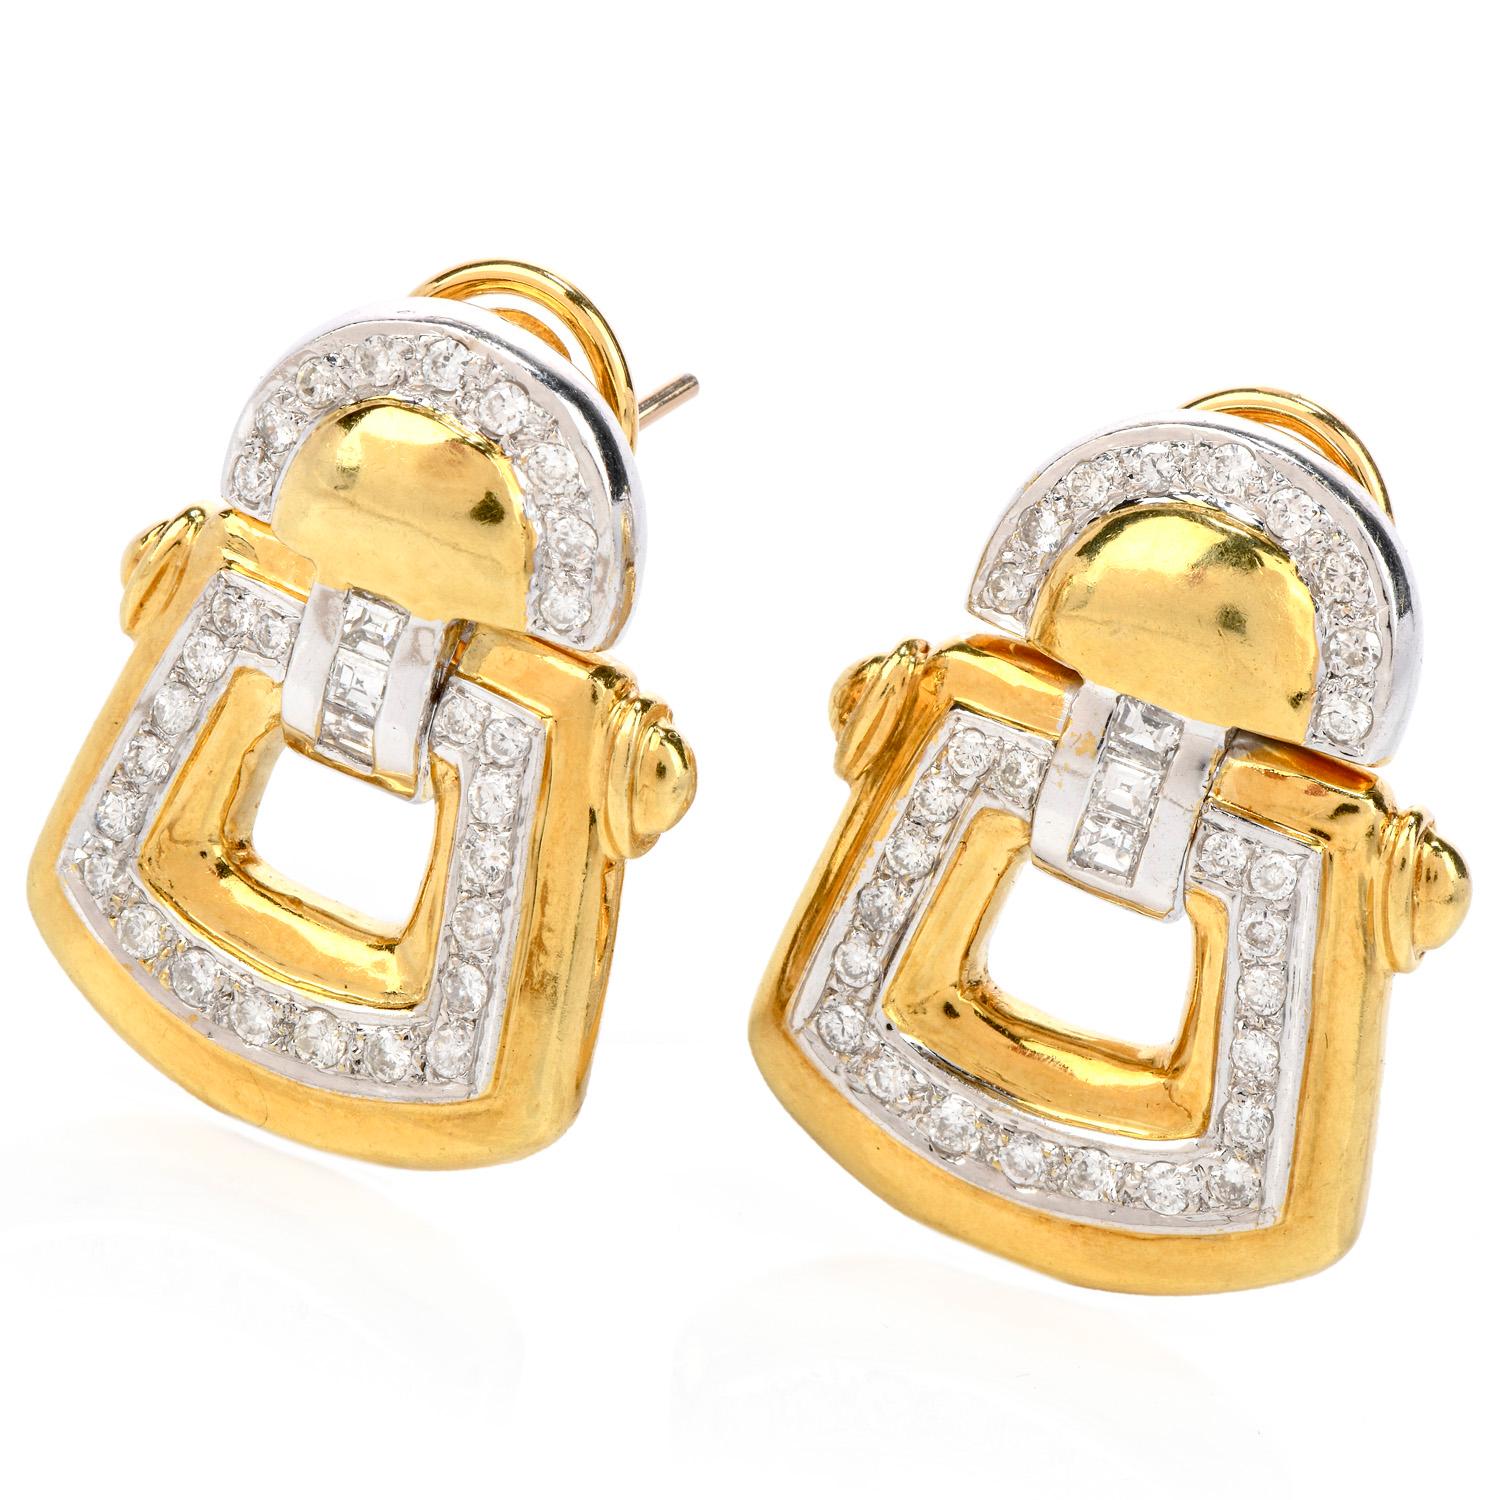 Decorate yourself with these stylish and trendy tribal design Estate 18K Yellow & White Gold Door Knocker Earrings!  These earrings hold 62 diamonds of round and asscher cut, totaling 1.50  carats, and with H-I color and VS clarity. They are set in